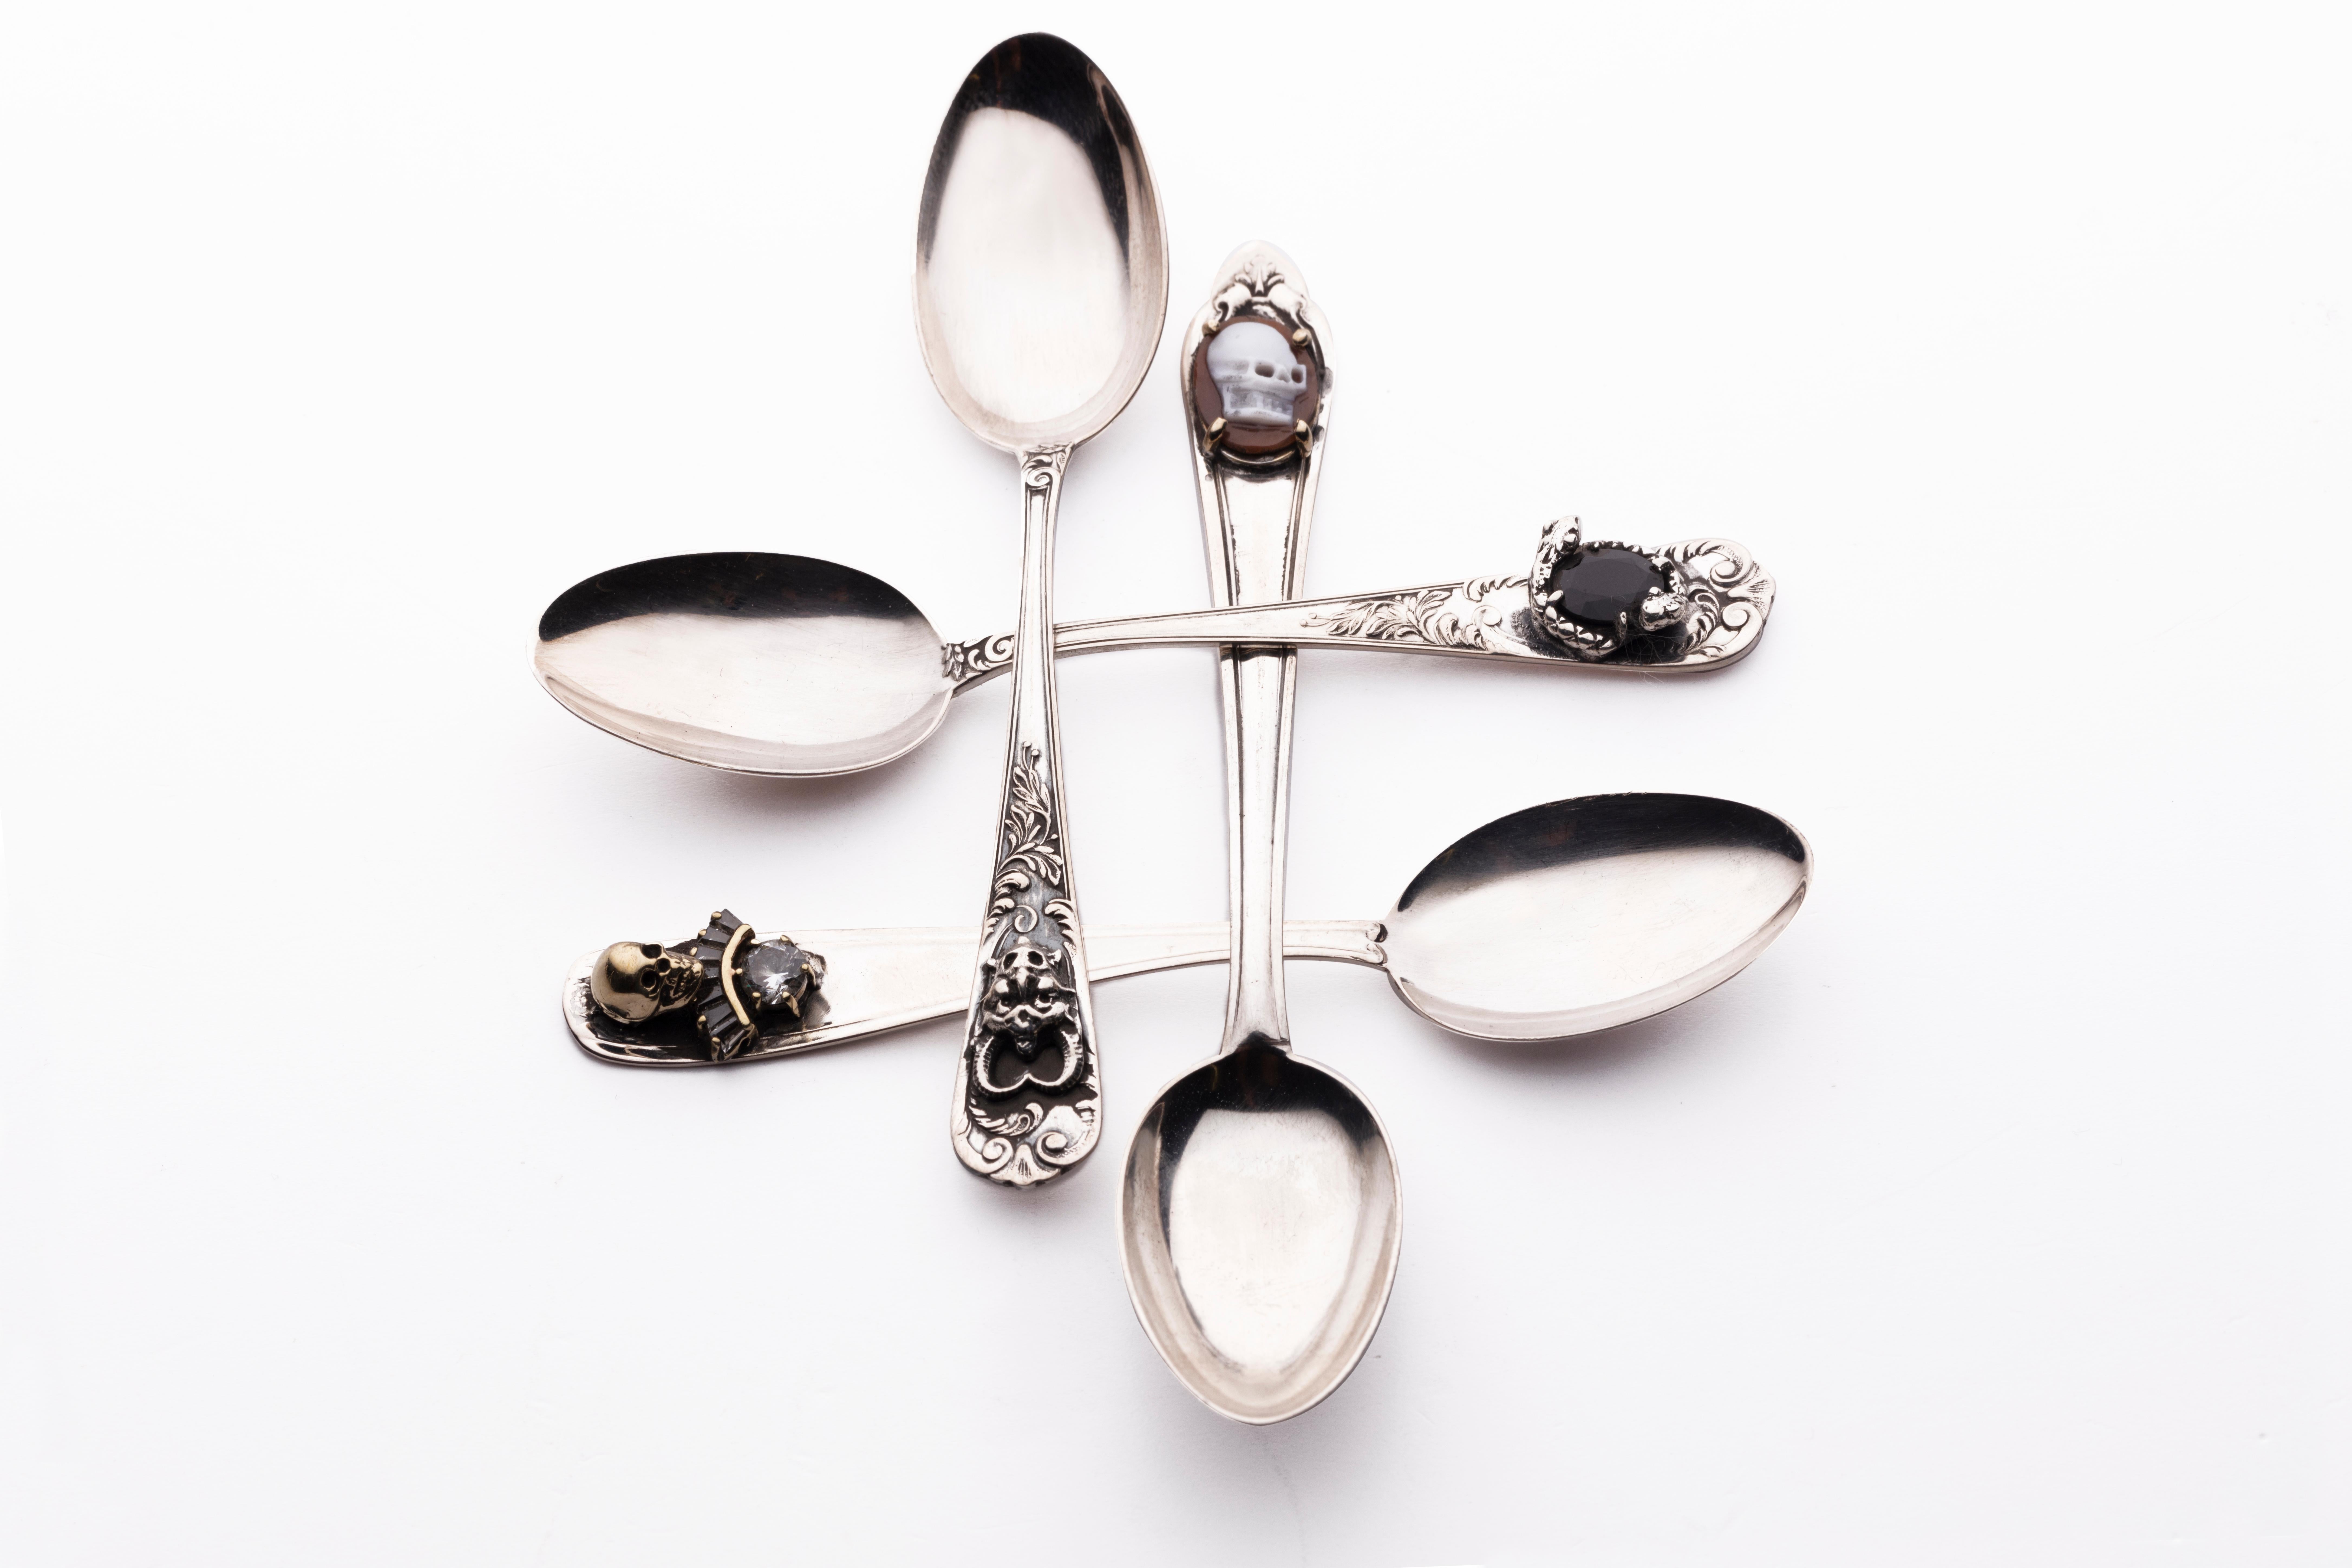 Tradition with a new attitude.
Wisely designed reinterpreting Classic lines of jewelry, the silver spoons from IOSSELLIANI give a new light to established patterns, carving passion out of our imagination.
IOSSELLIANI spoons brilliantly combine